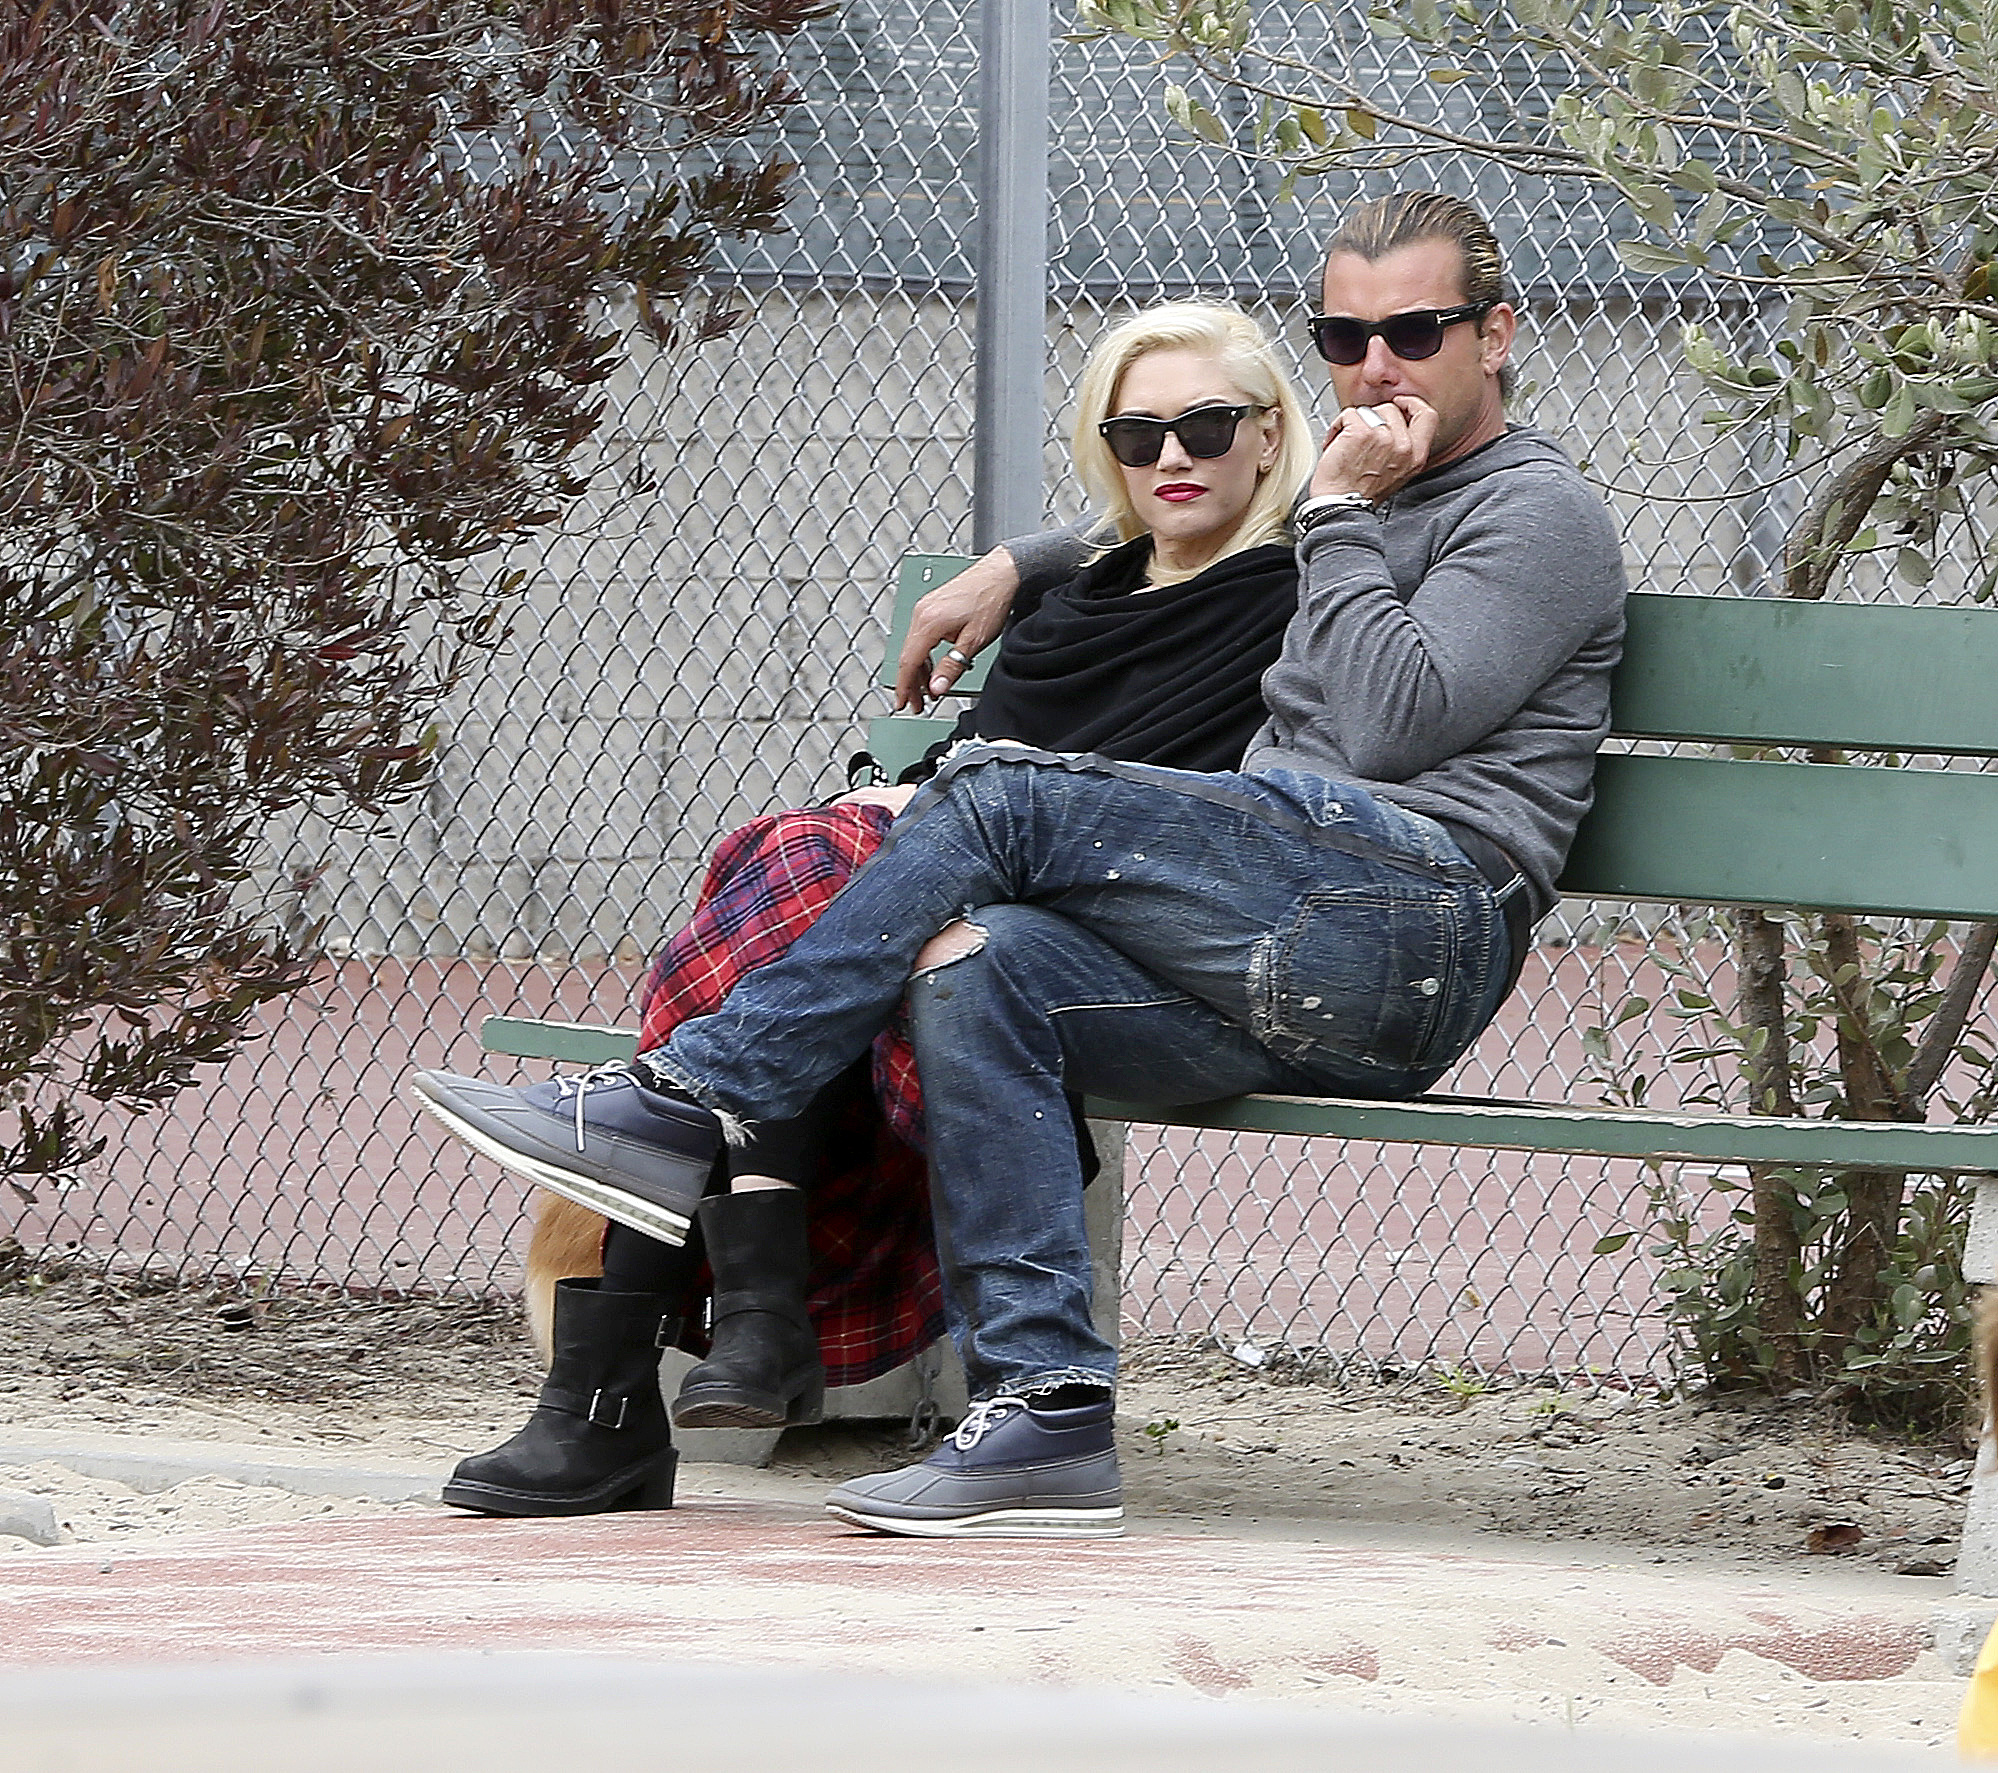 Brentwood, CA - Gwen Stefani and her hubby Gavin Rossdale get some family time with their kids, Kingston and Zuma at the park this afternoon.  While the boys played, Gwen and Gavin cuddled up on a bench and had some laughs.  At one point the 